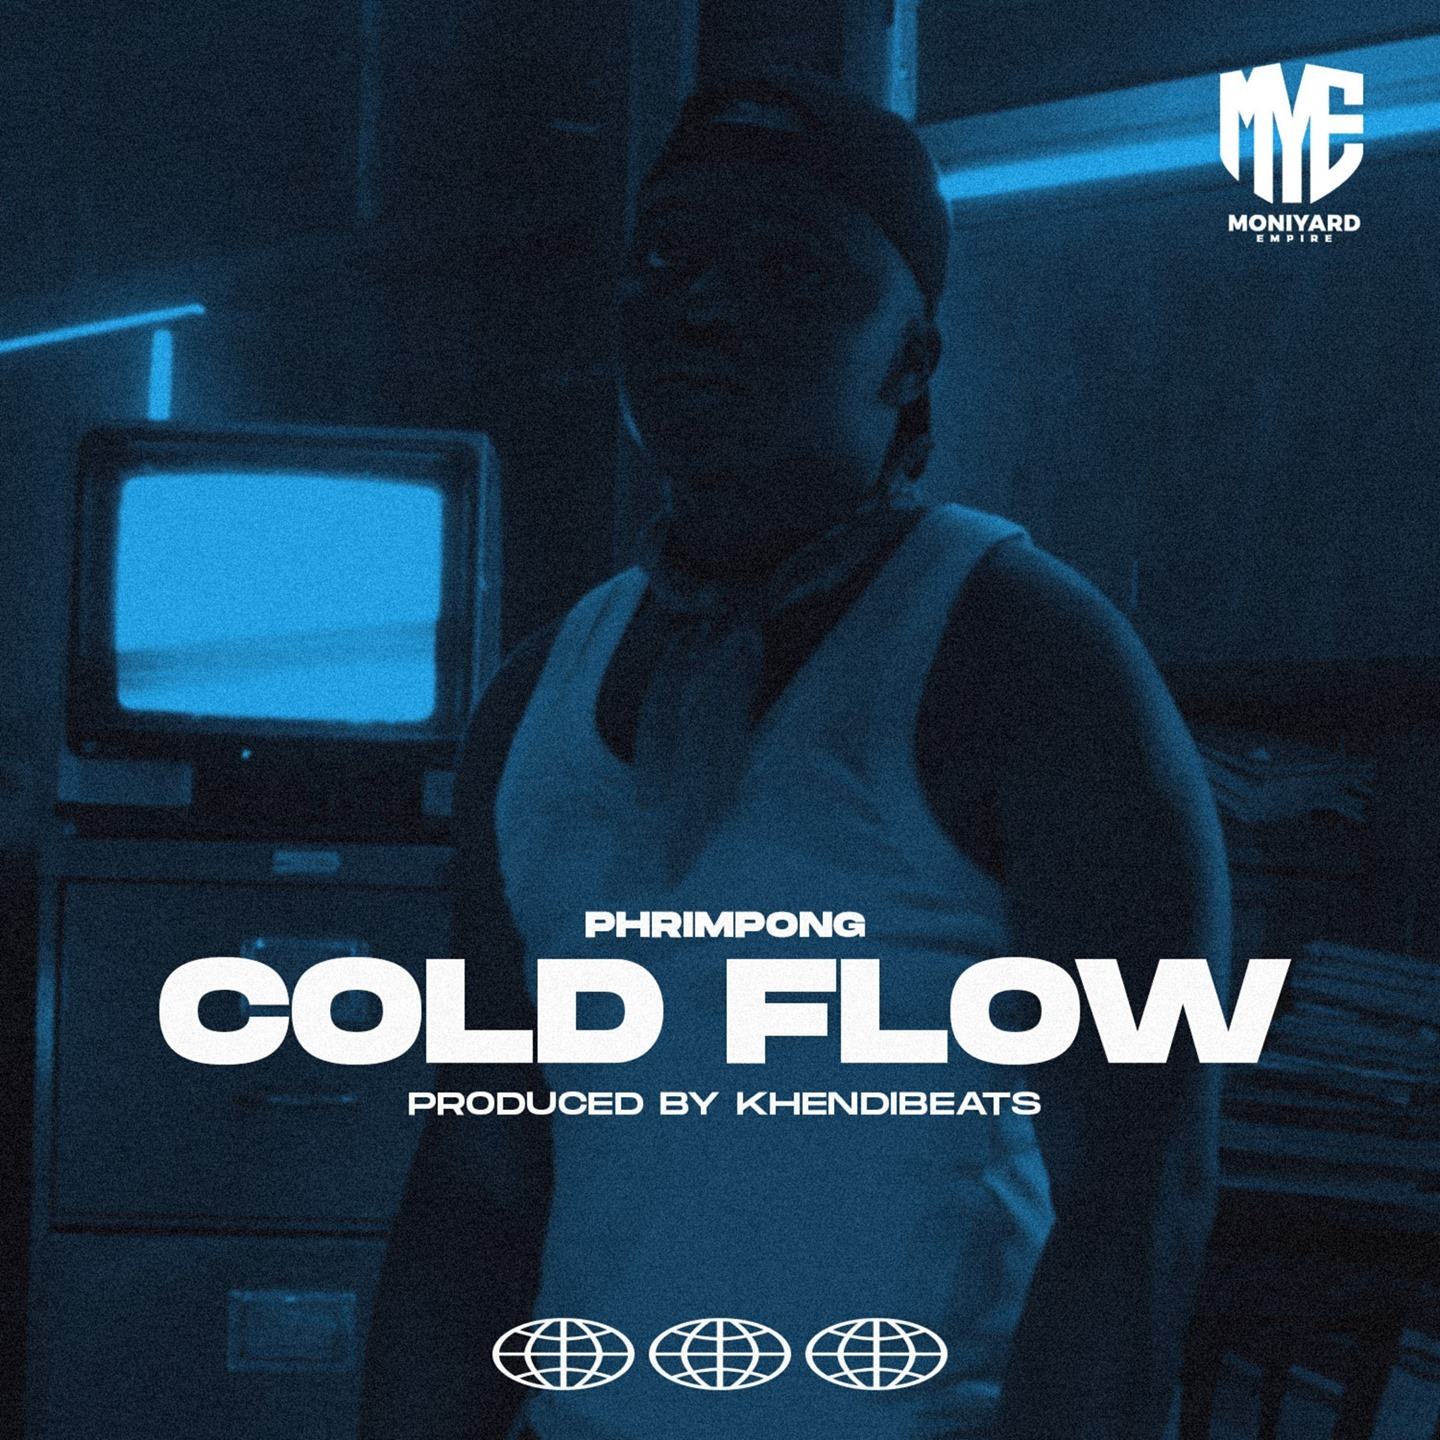 Phrimpong Cold Flow